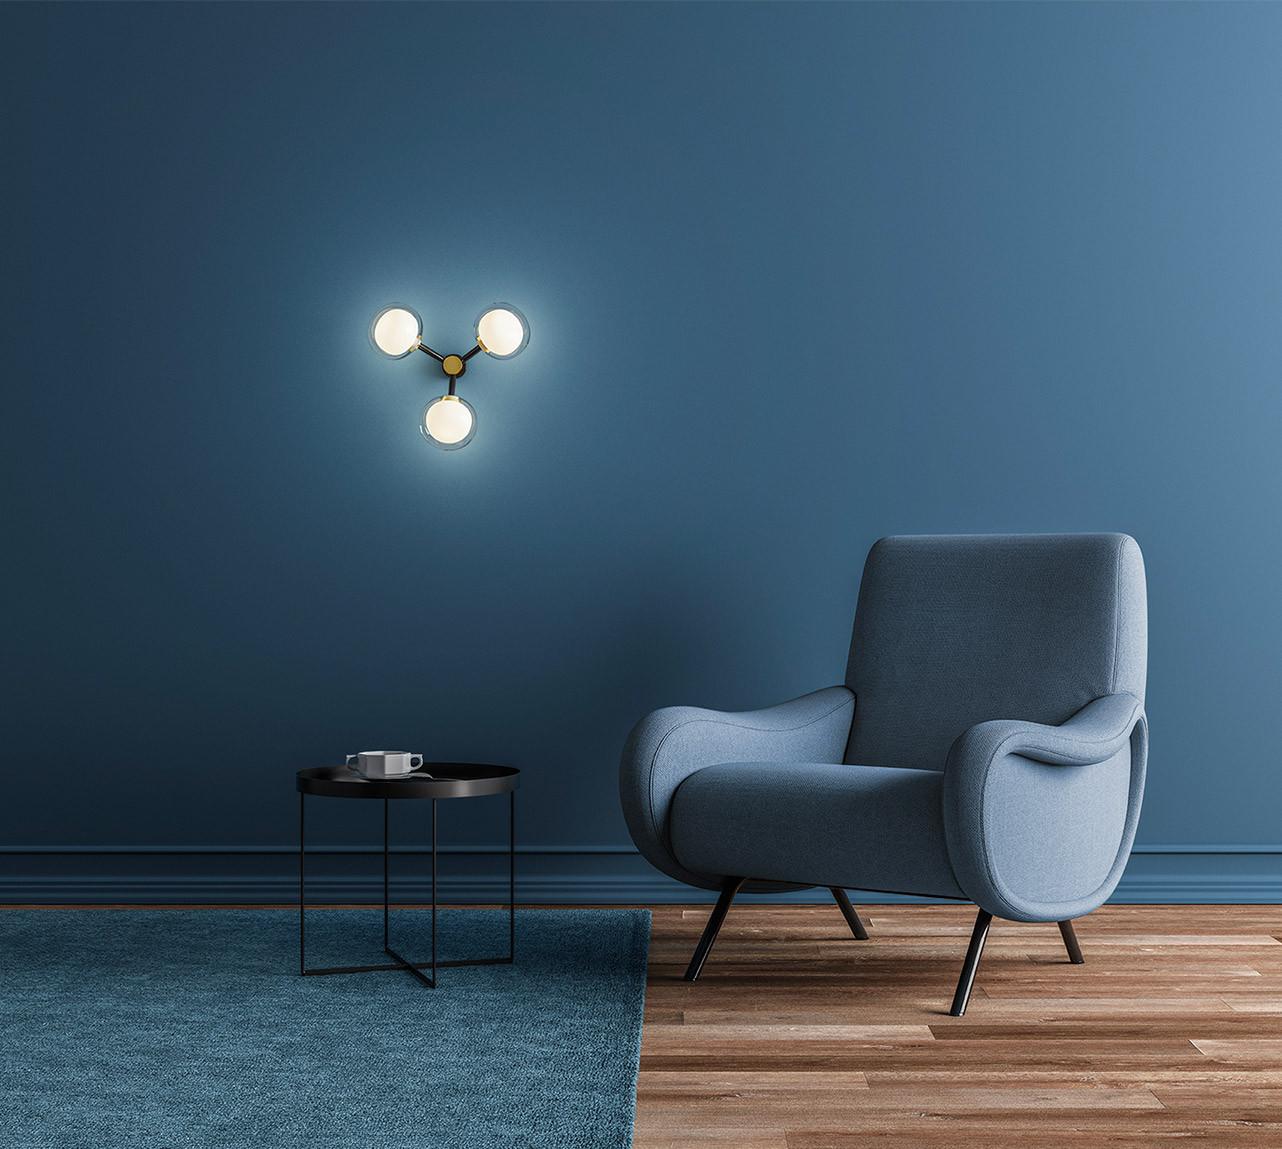 Wall Lamp Nabila 552.73 by Corrado Dotti x TOOY
3 lights
UL Listed 

Model shown:
Finish: Chrome
Color: Smoke glass

Bulb compliance : 3 x G9 220/240V 3W Compliant with USA electric system

50s inspired collection of elegant and sophisticated lamps